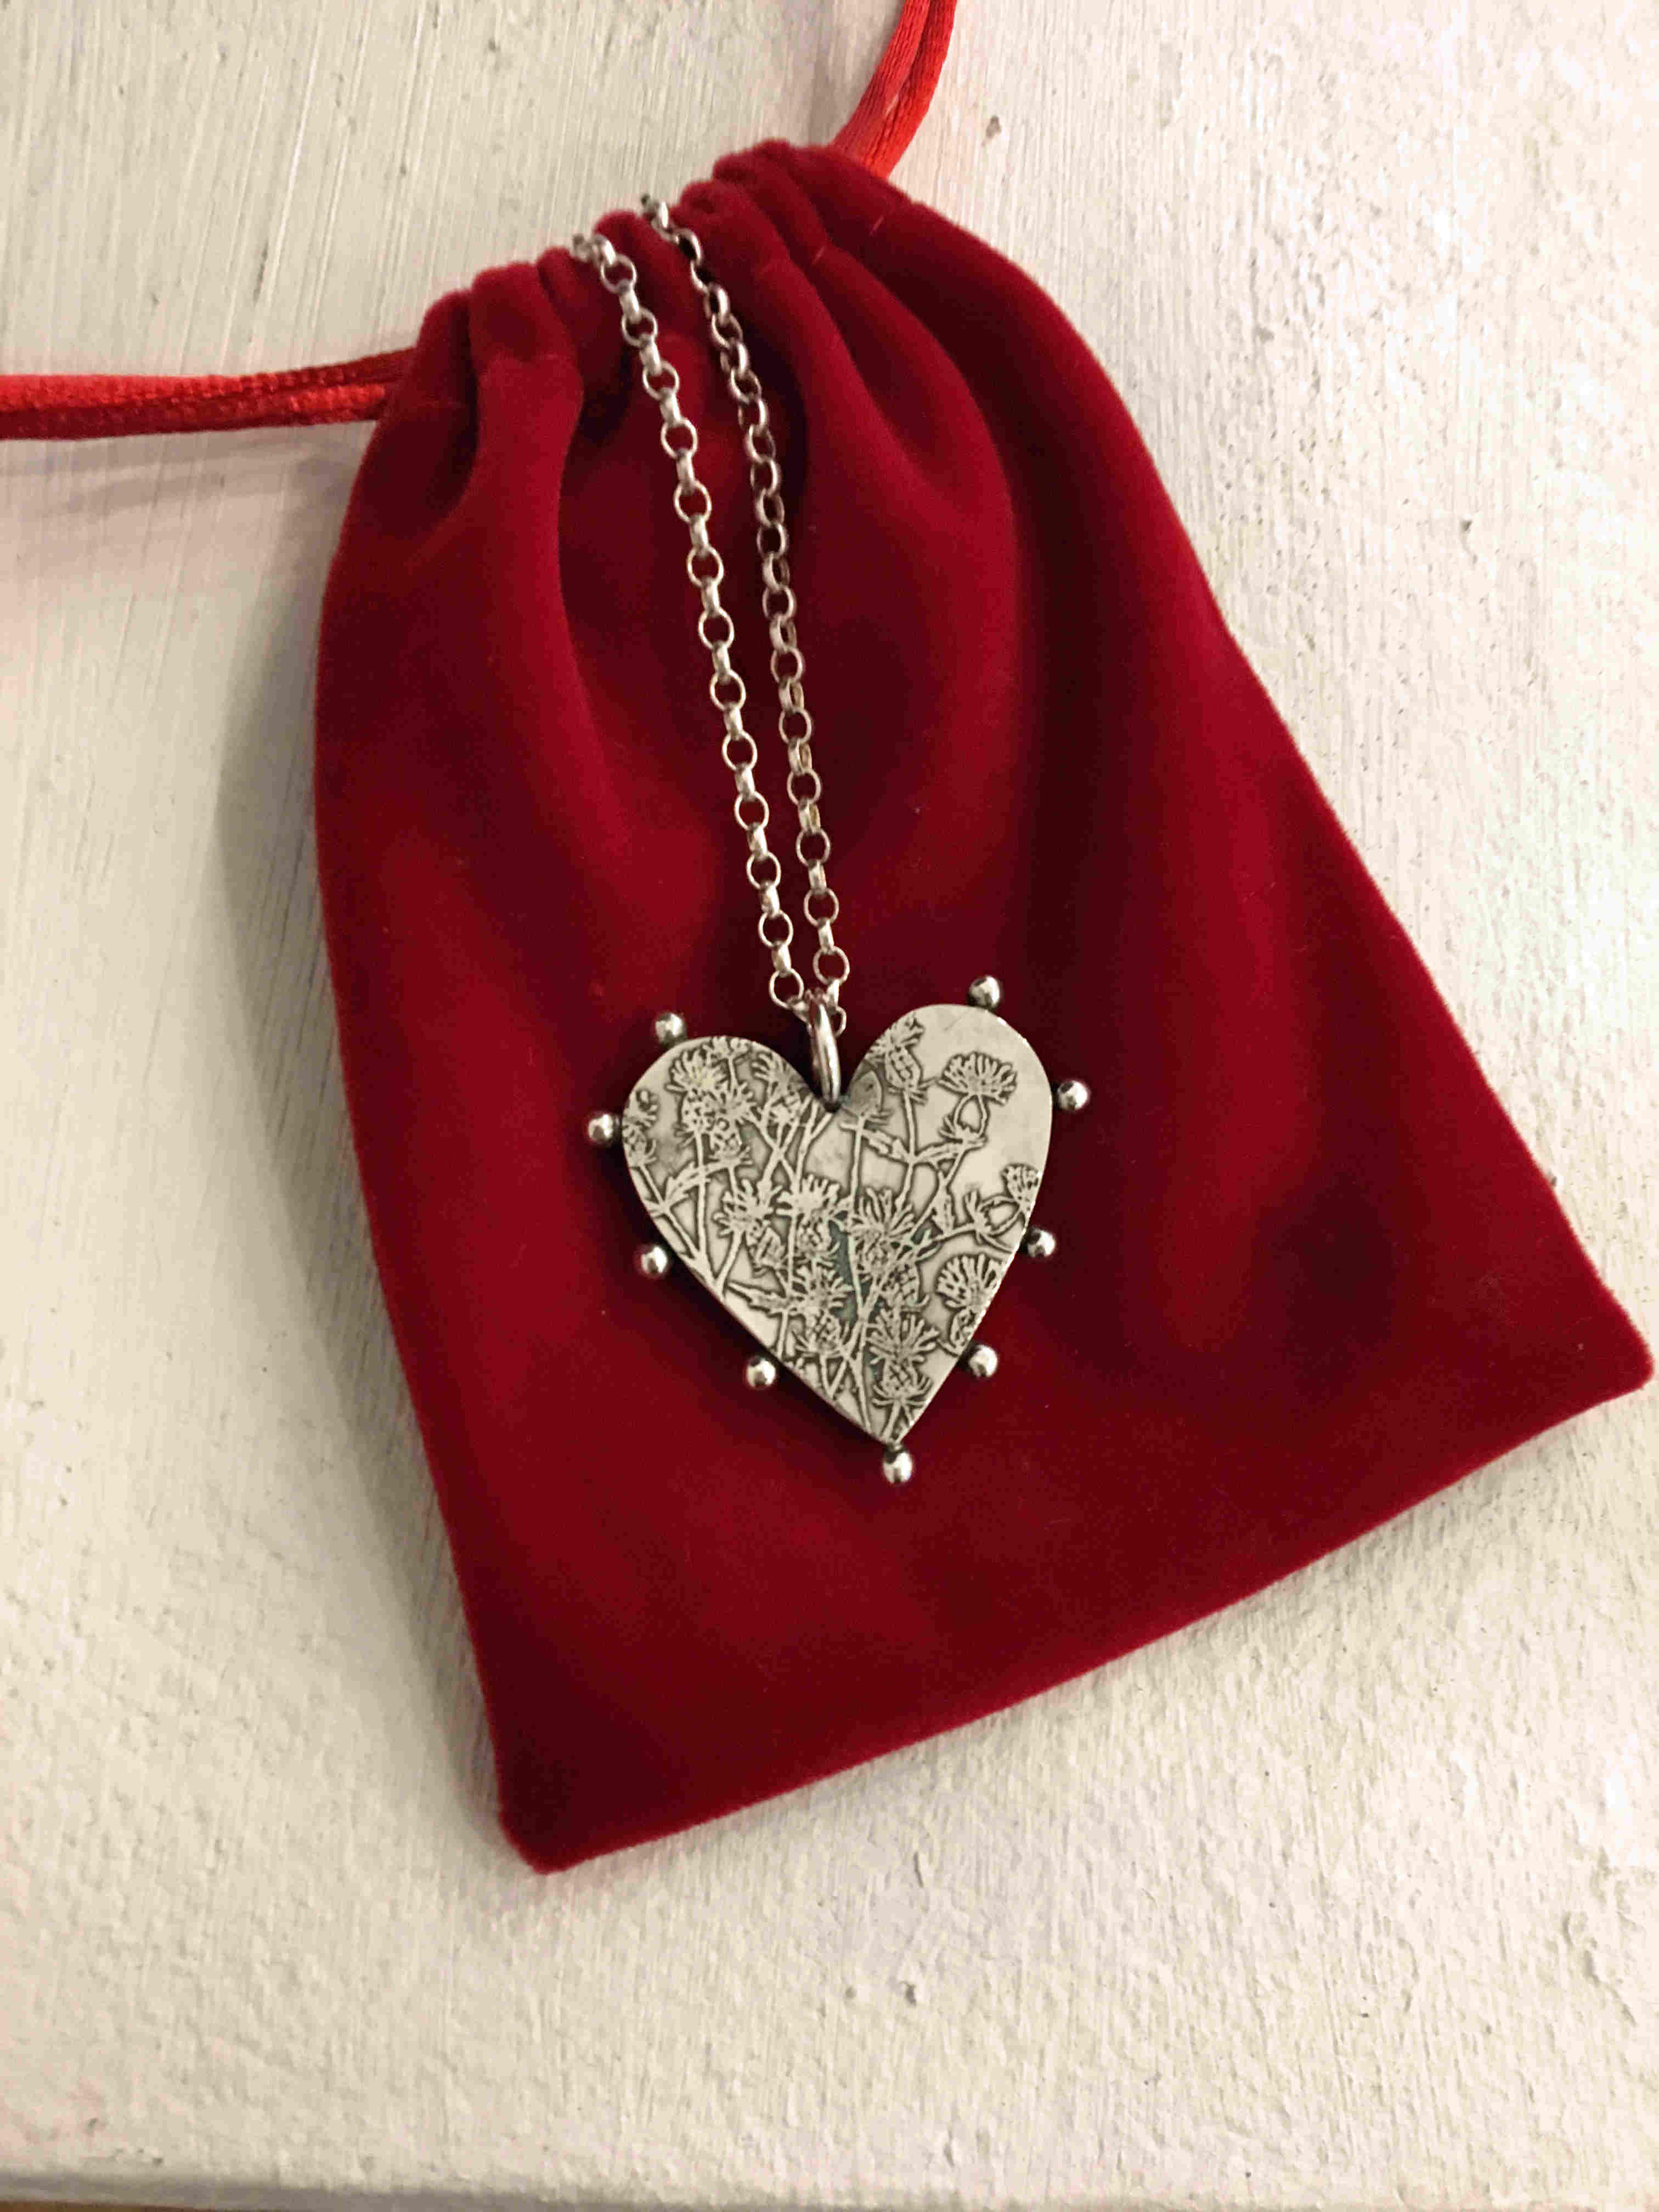 'Large Box Heart Necklace with Etched Thistles' by artist Carol Docherty